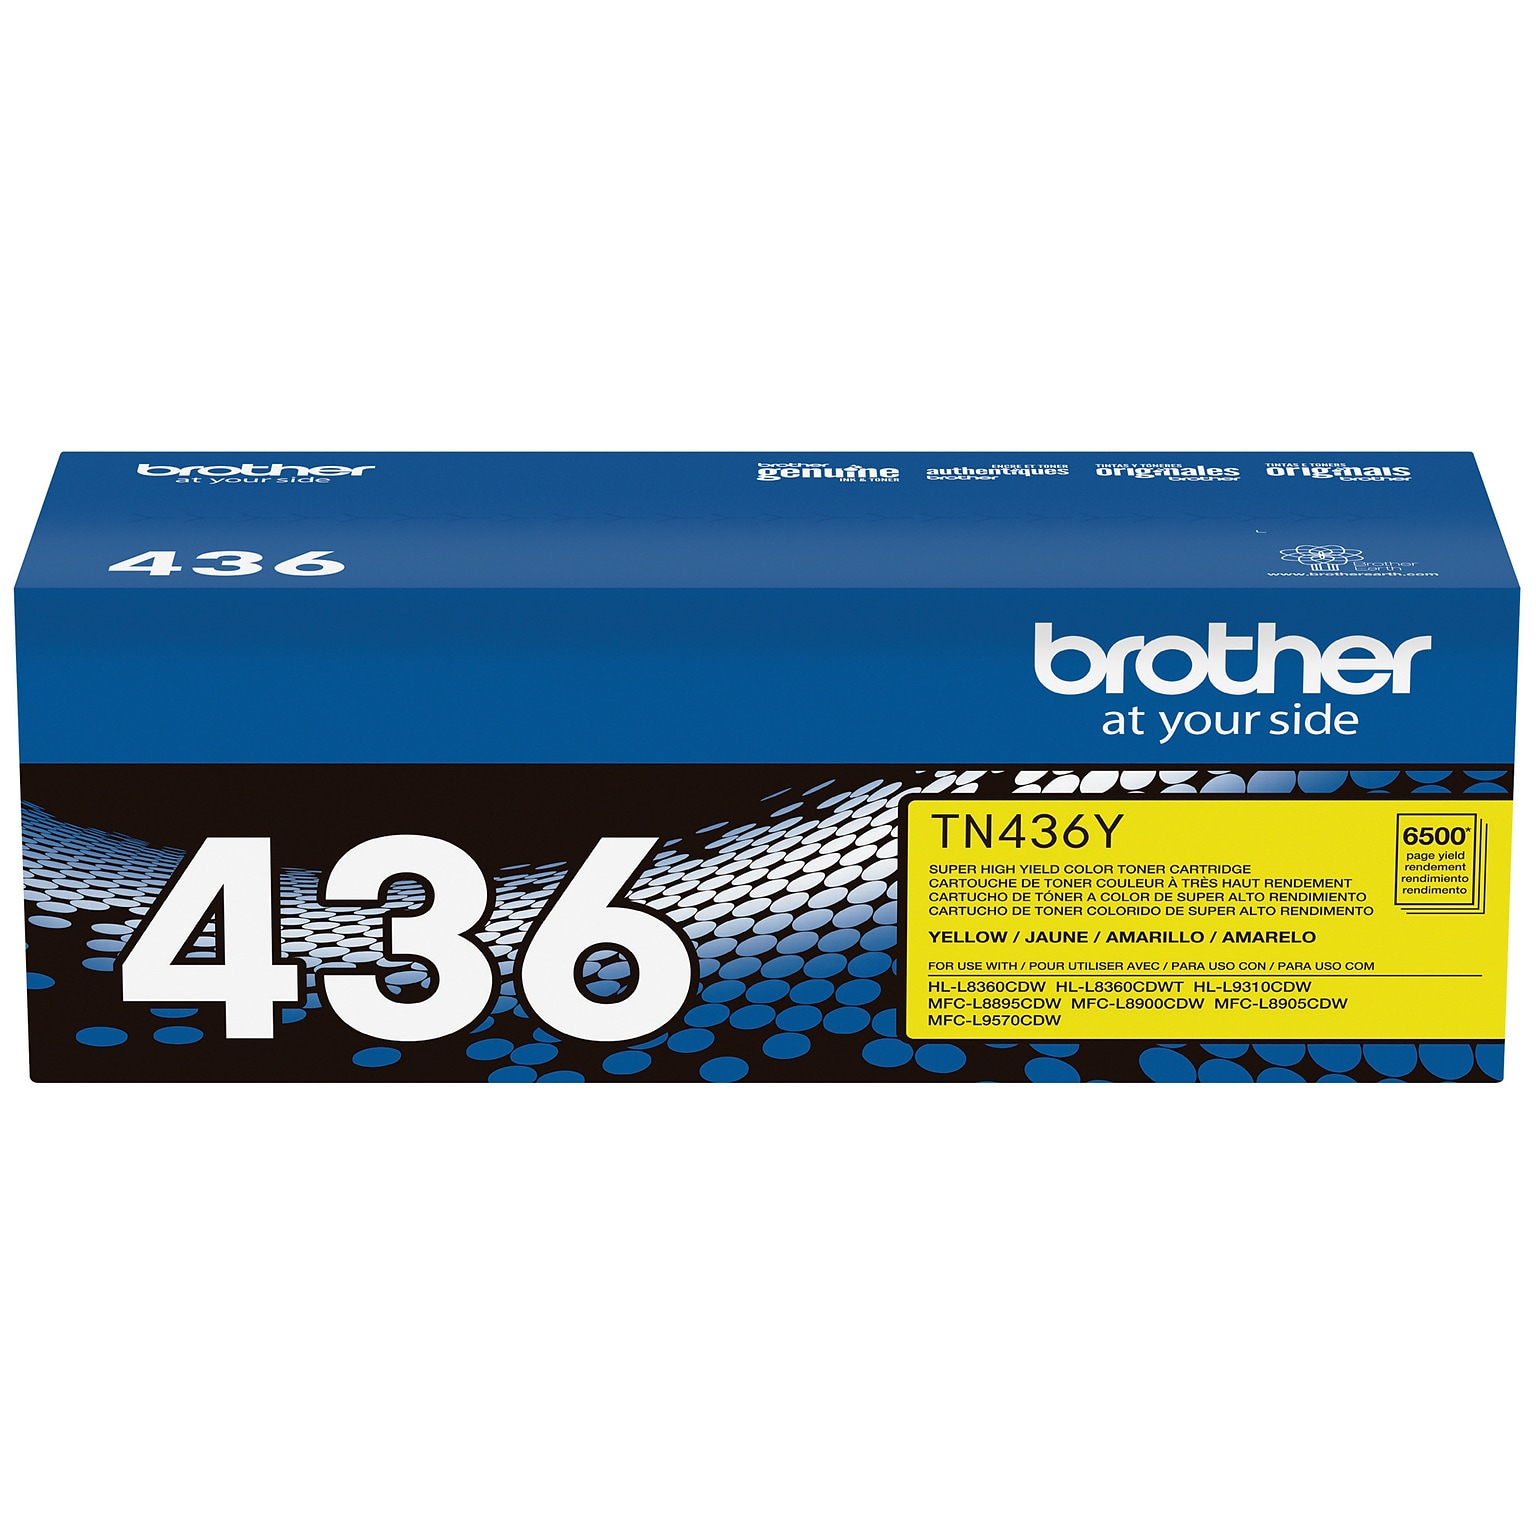 Brother TN-436 Yellow Extra High Yield Toner Cartridge, Print Up to 6,500 Pages (TN436Y)